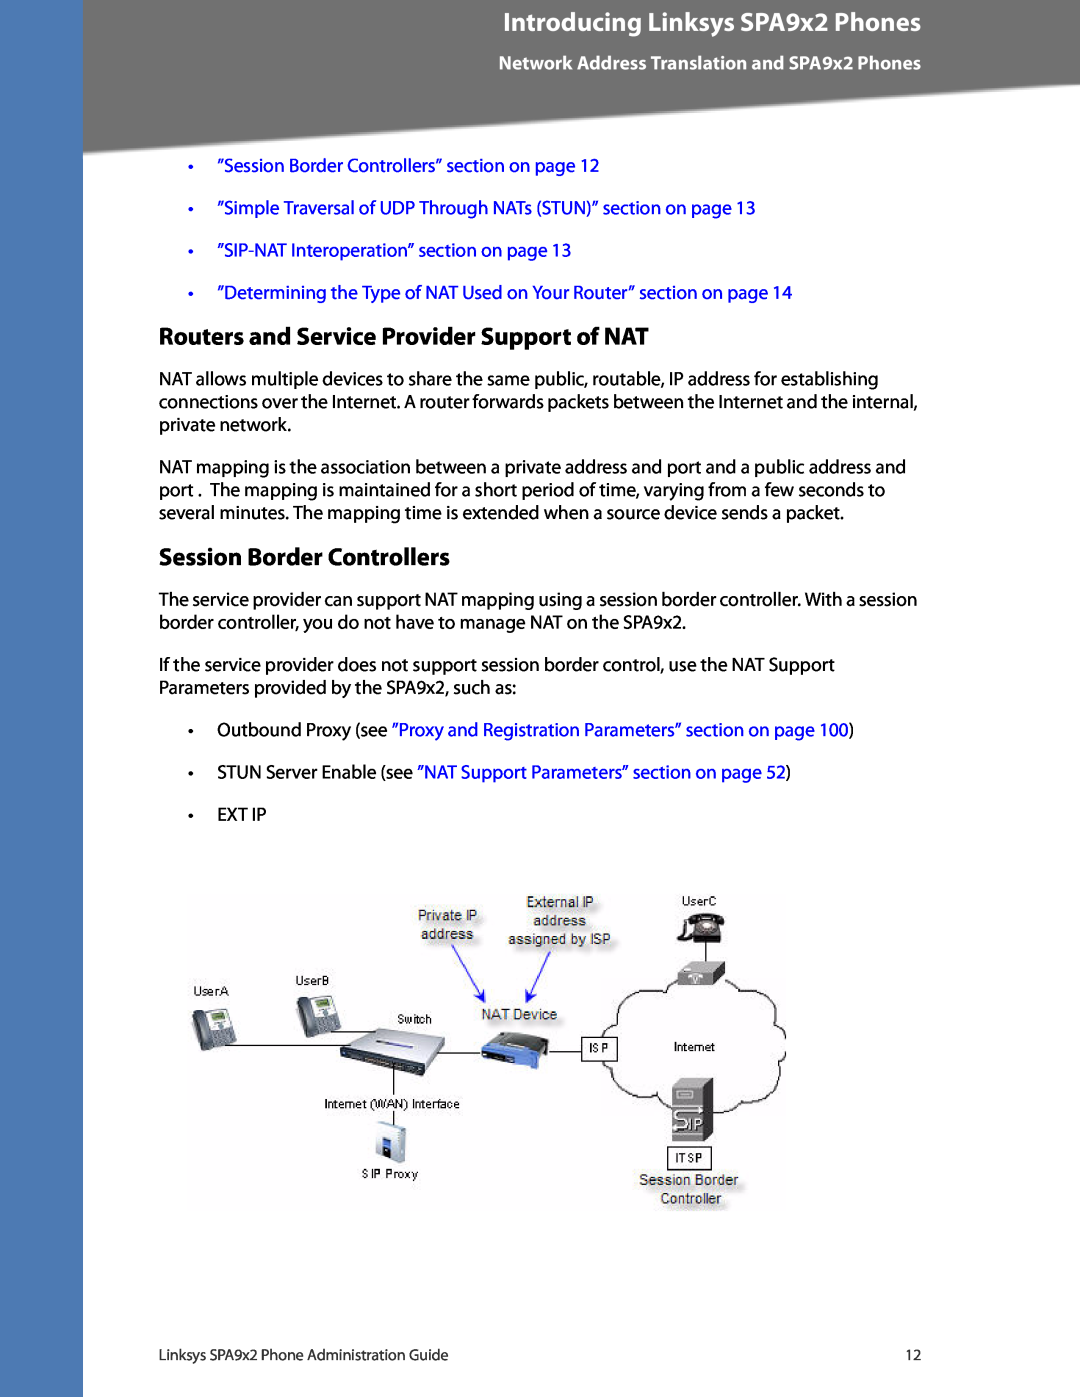 Linksys SPA922 Routers and Service Provider Support of NAT, Session Border Controllers, Introducing Linksys SPA9x2 Phones 